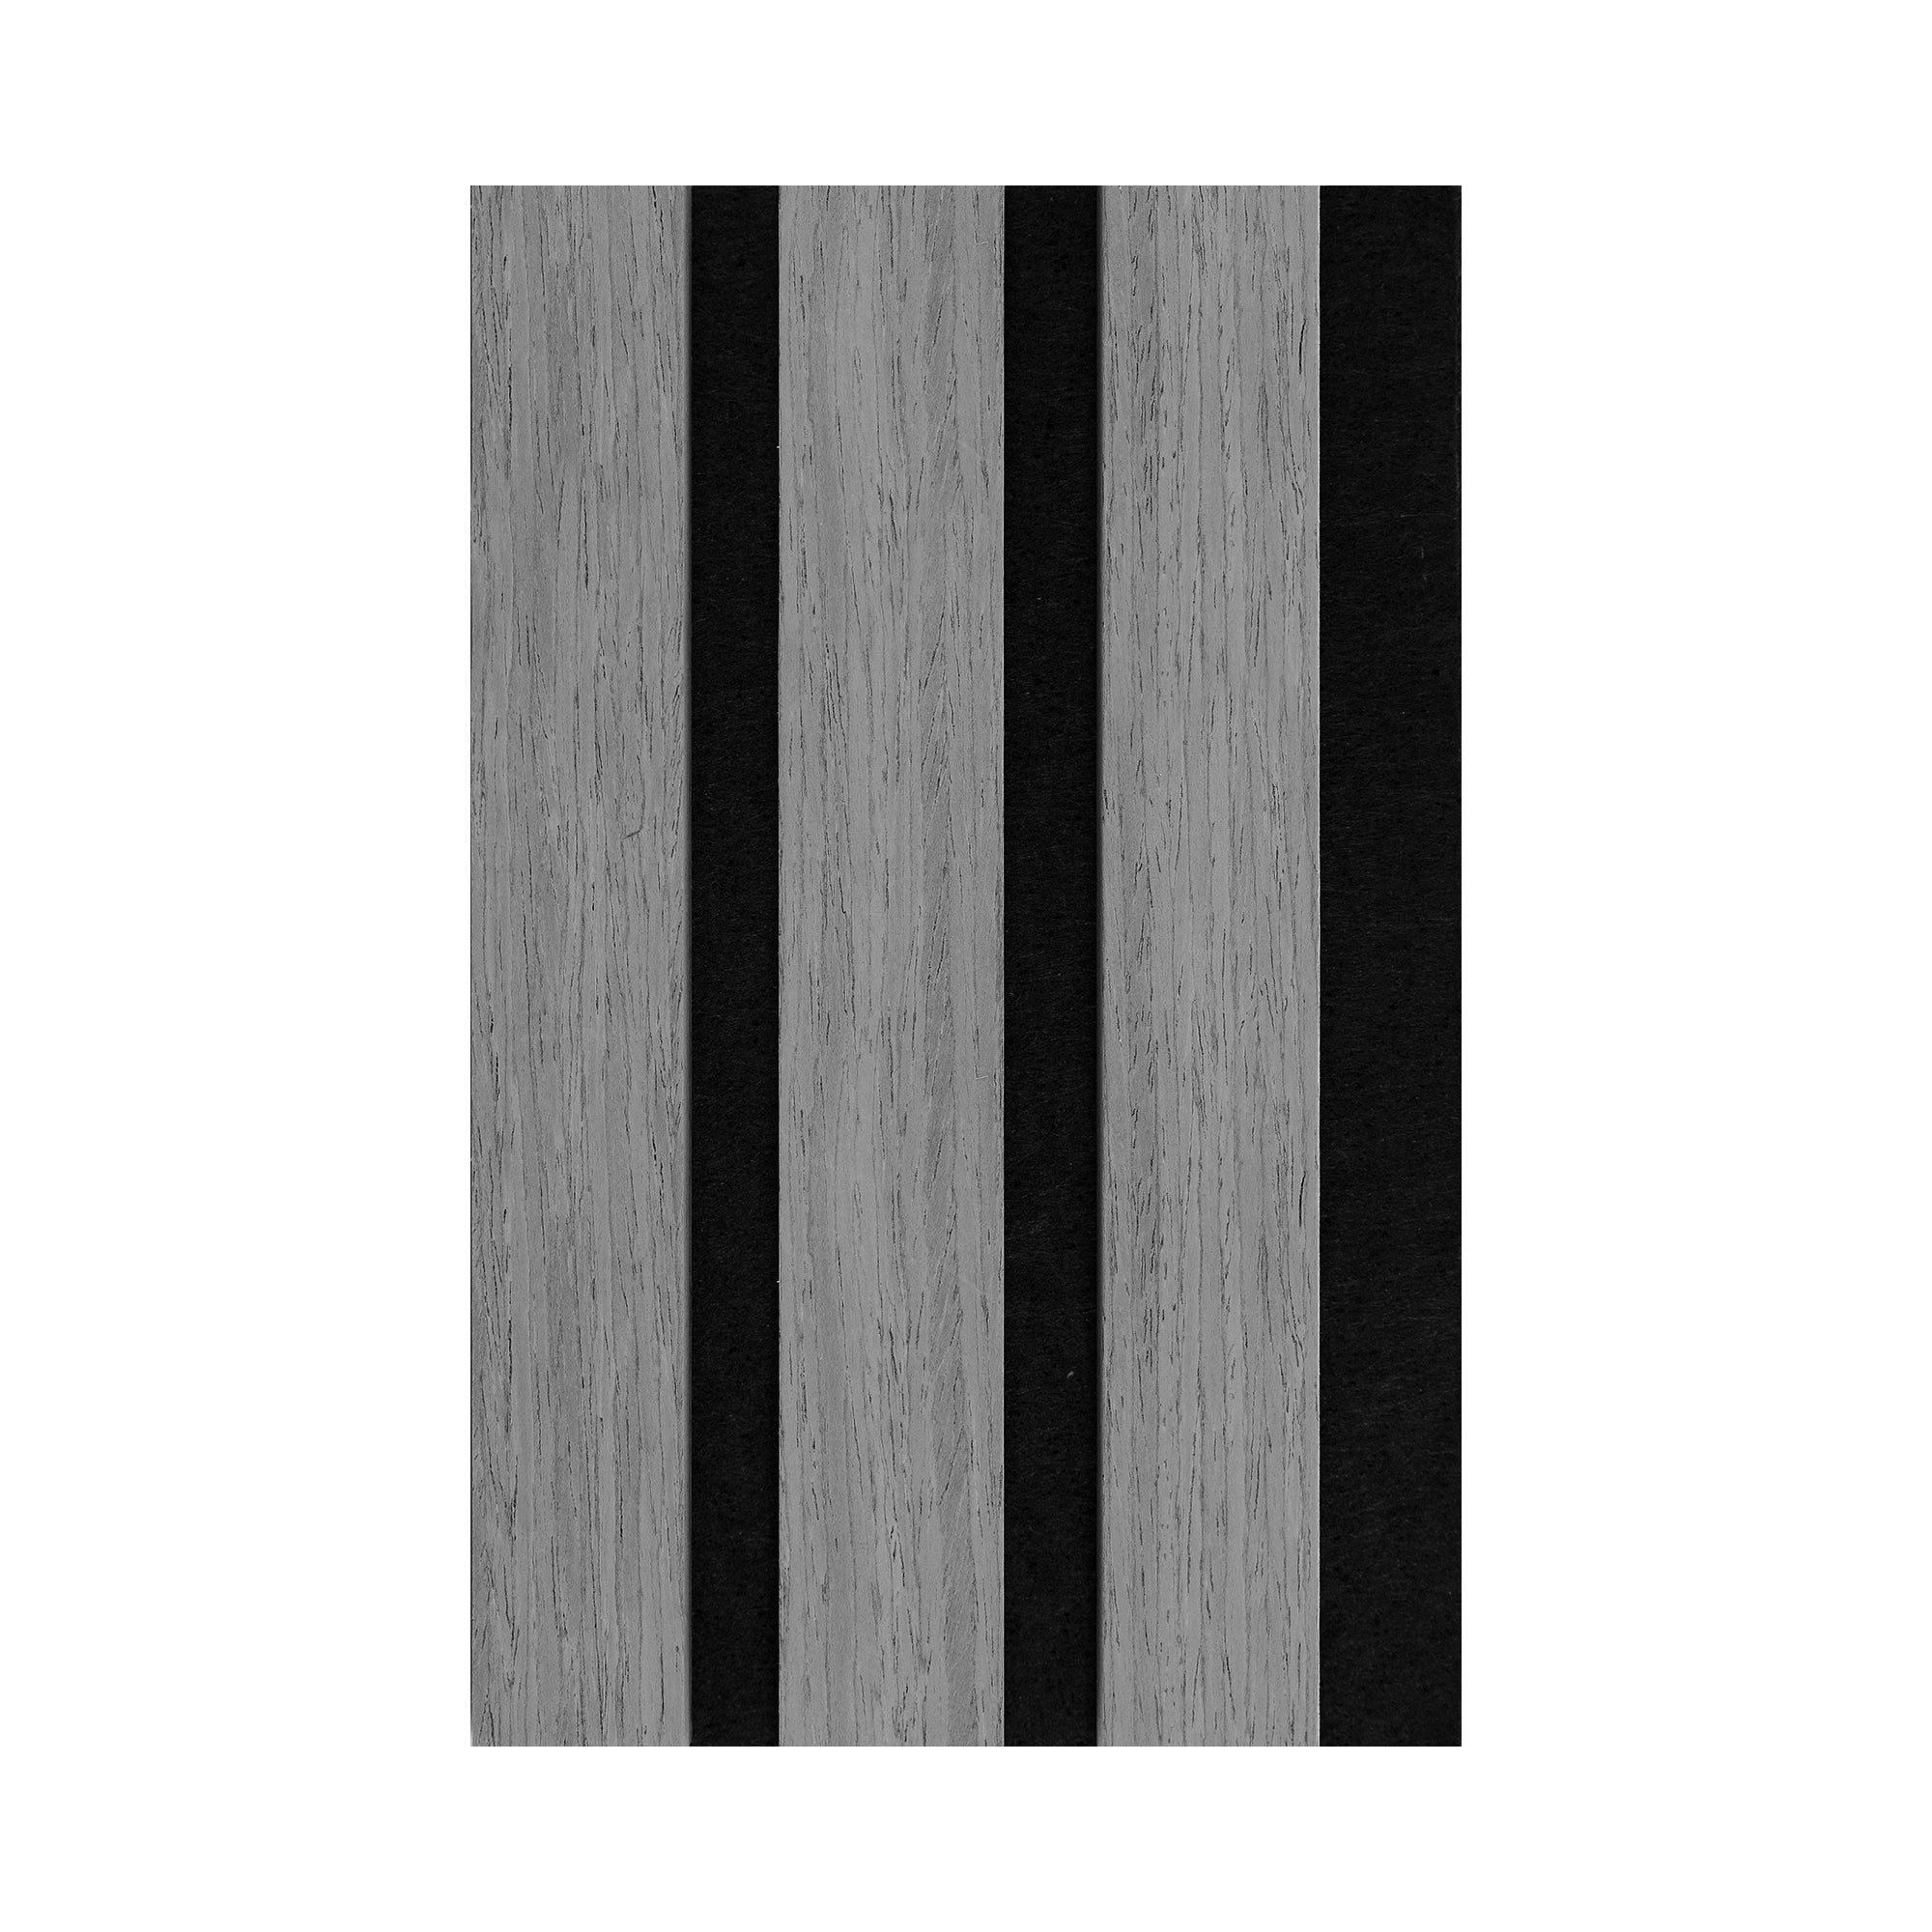 Sample Product 30x12.5x2.1 cm Argento Acoustic Wood Wall Panels